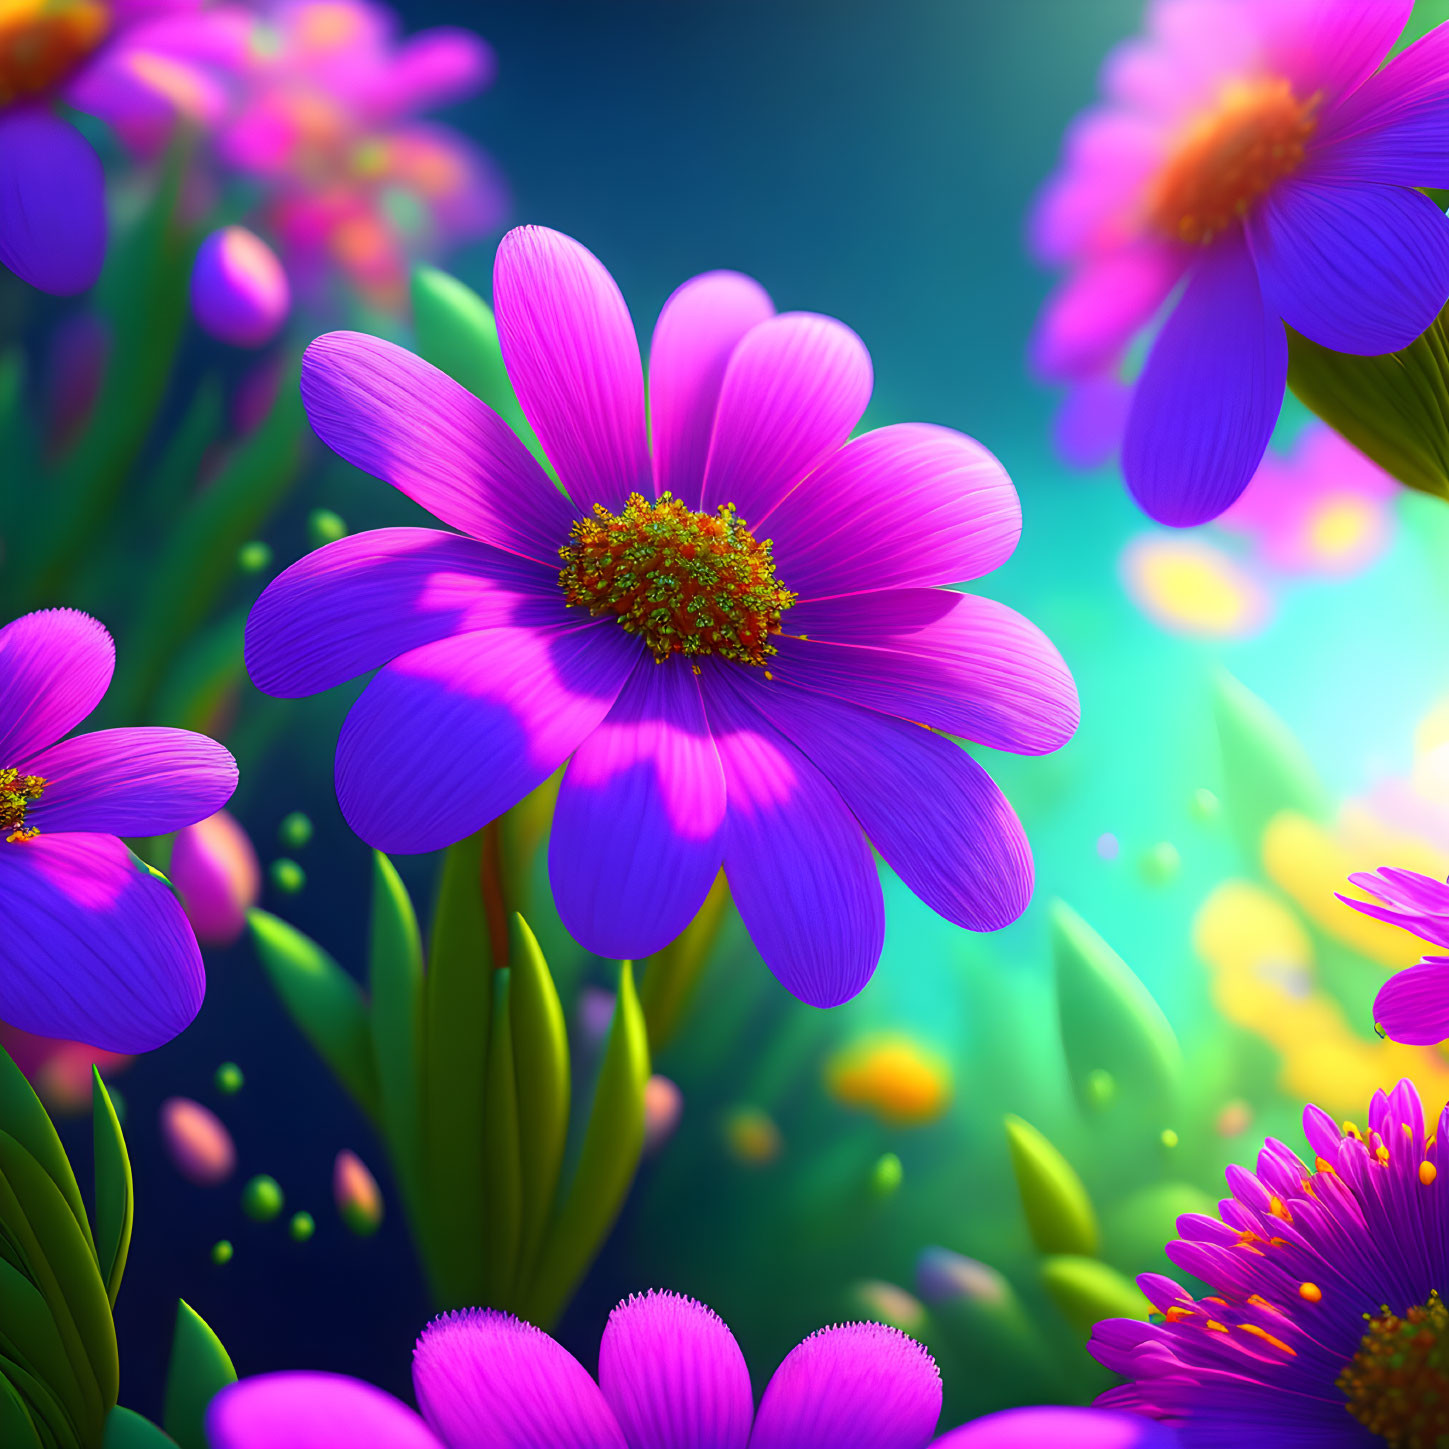 Vibrant purple flowers with central focus in soft glowing light